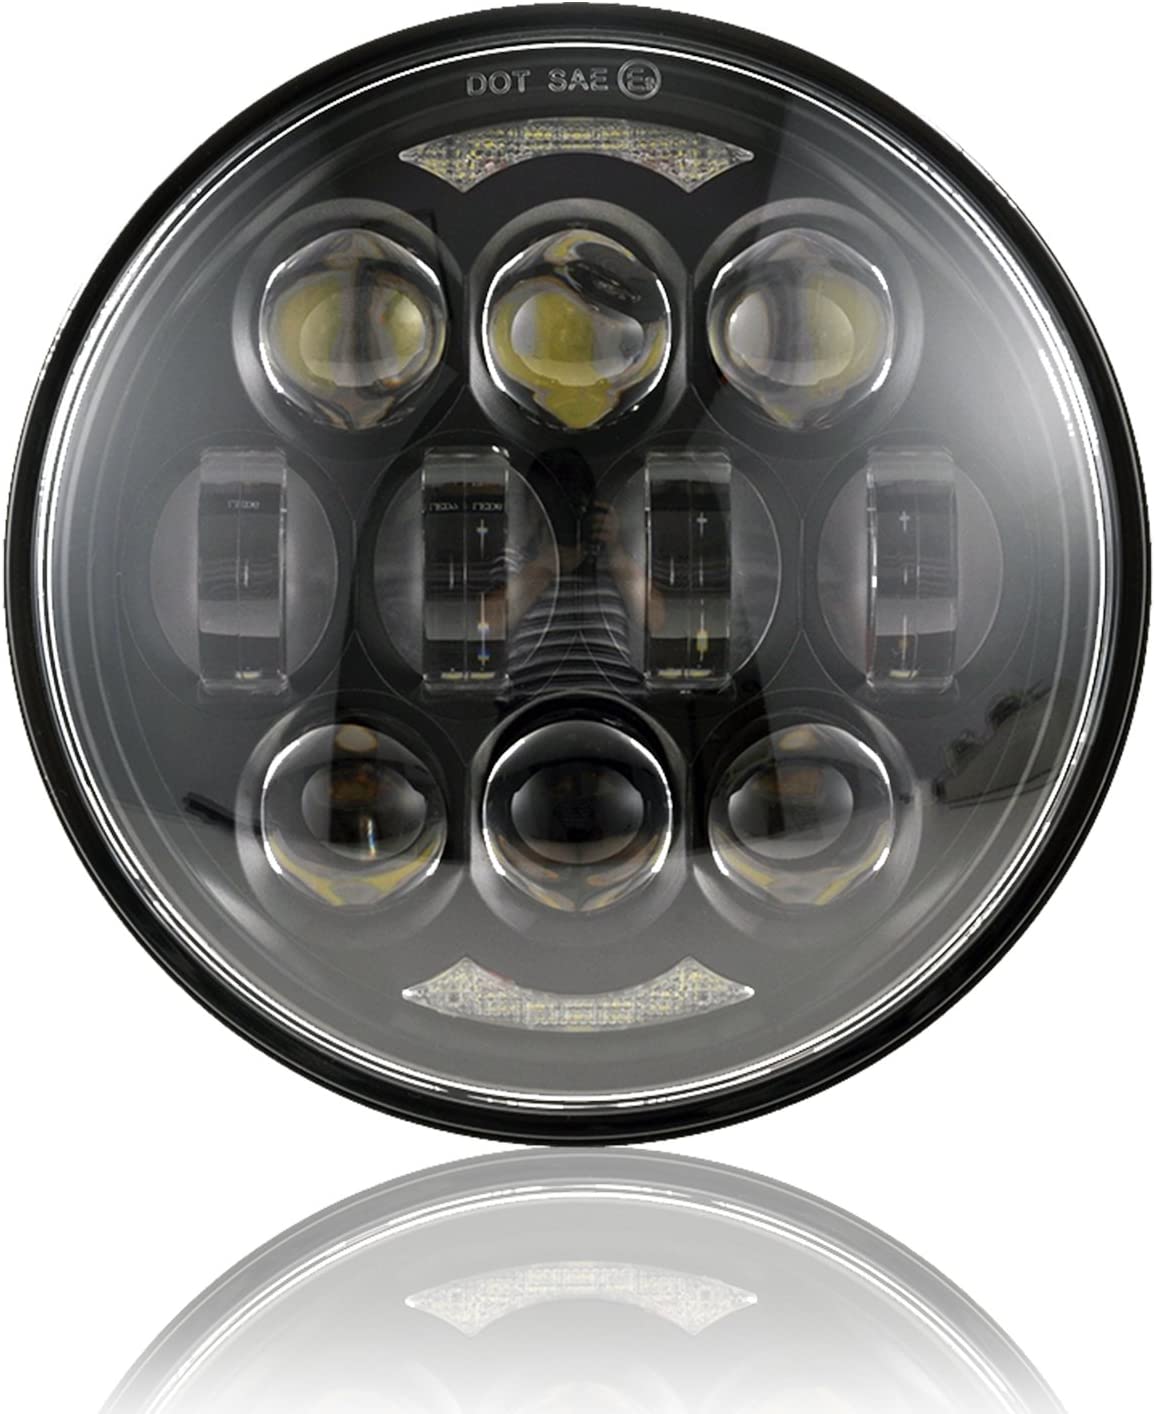 80W 5.75 inch Round LED Headlight for Harley Motorcycle – loyolight